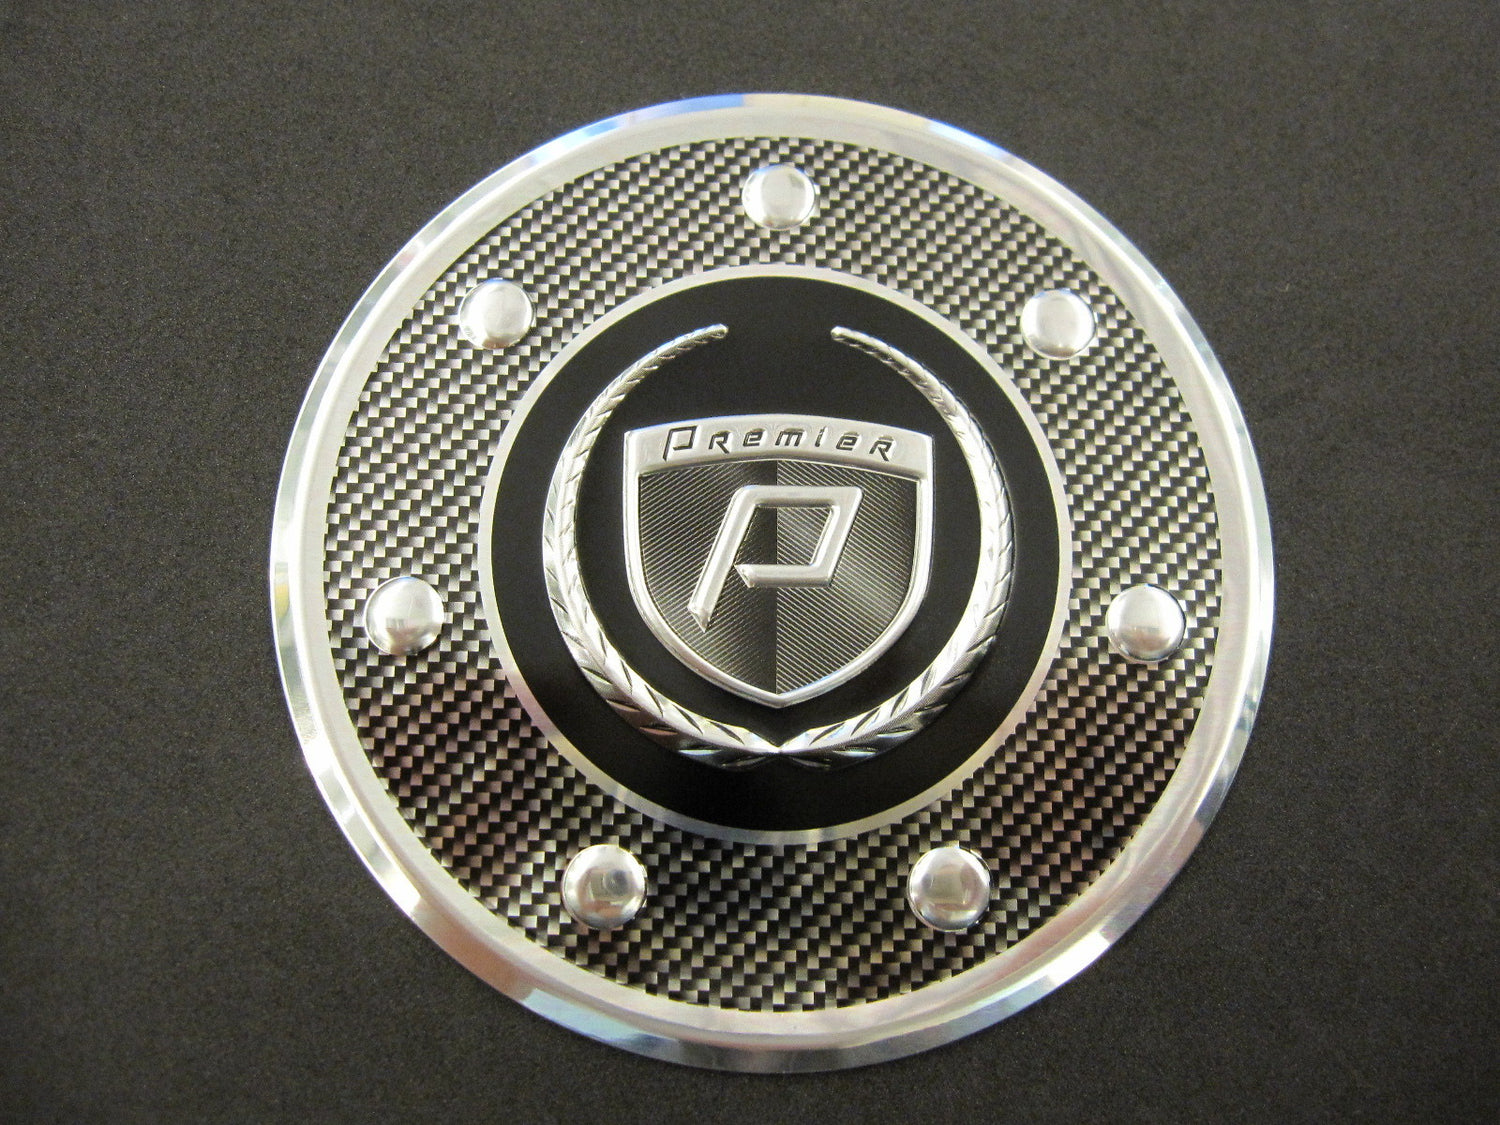 Electroformed Badge Used For Boats